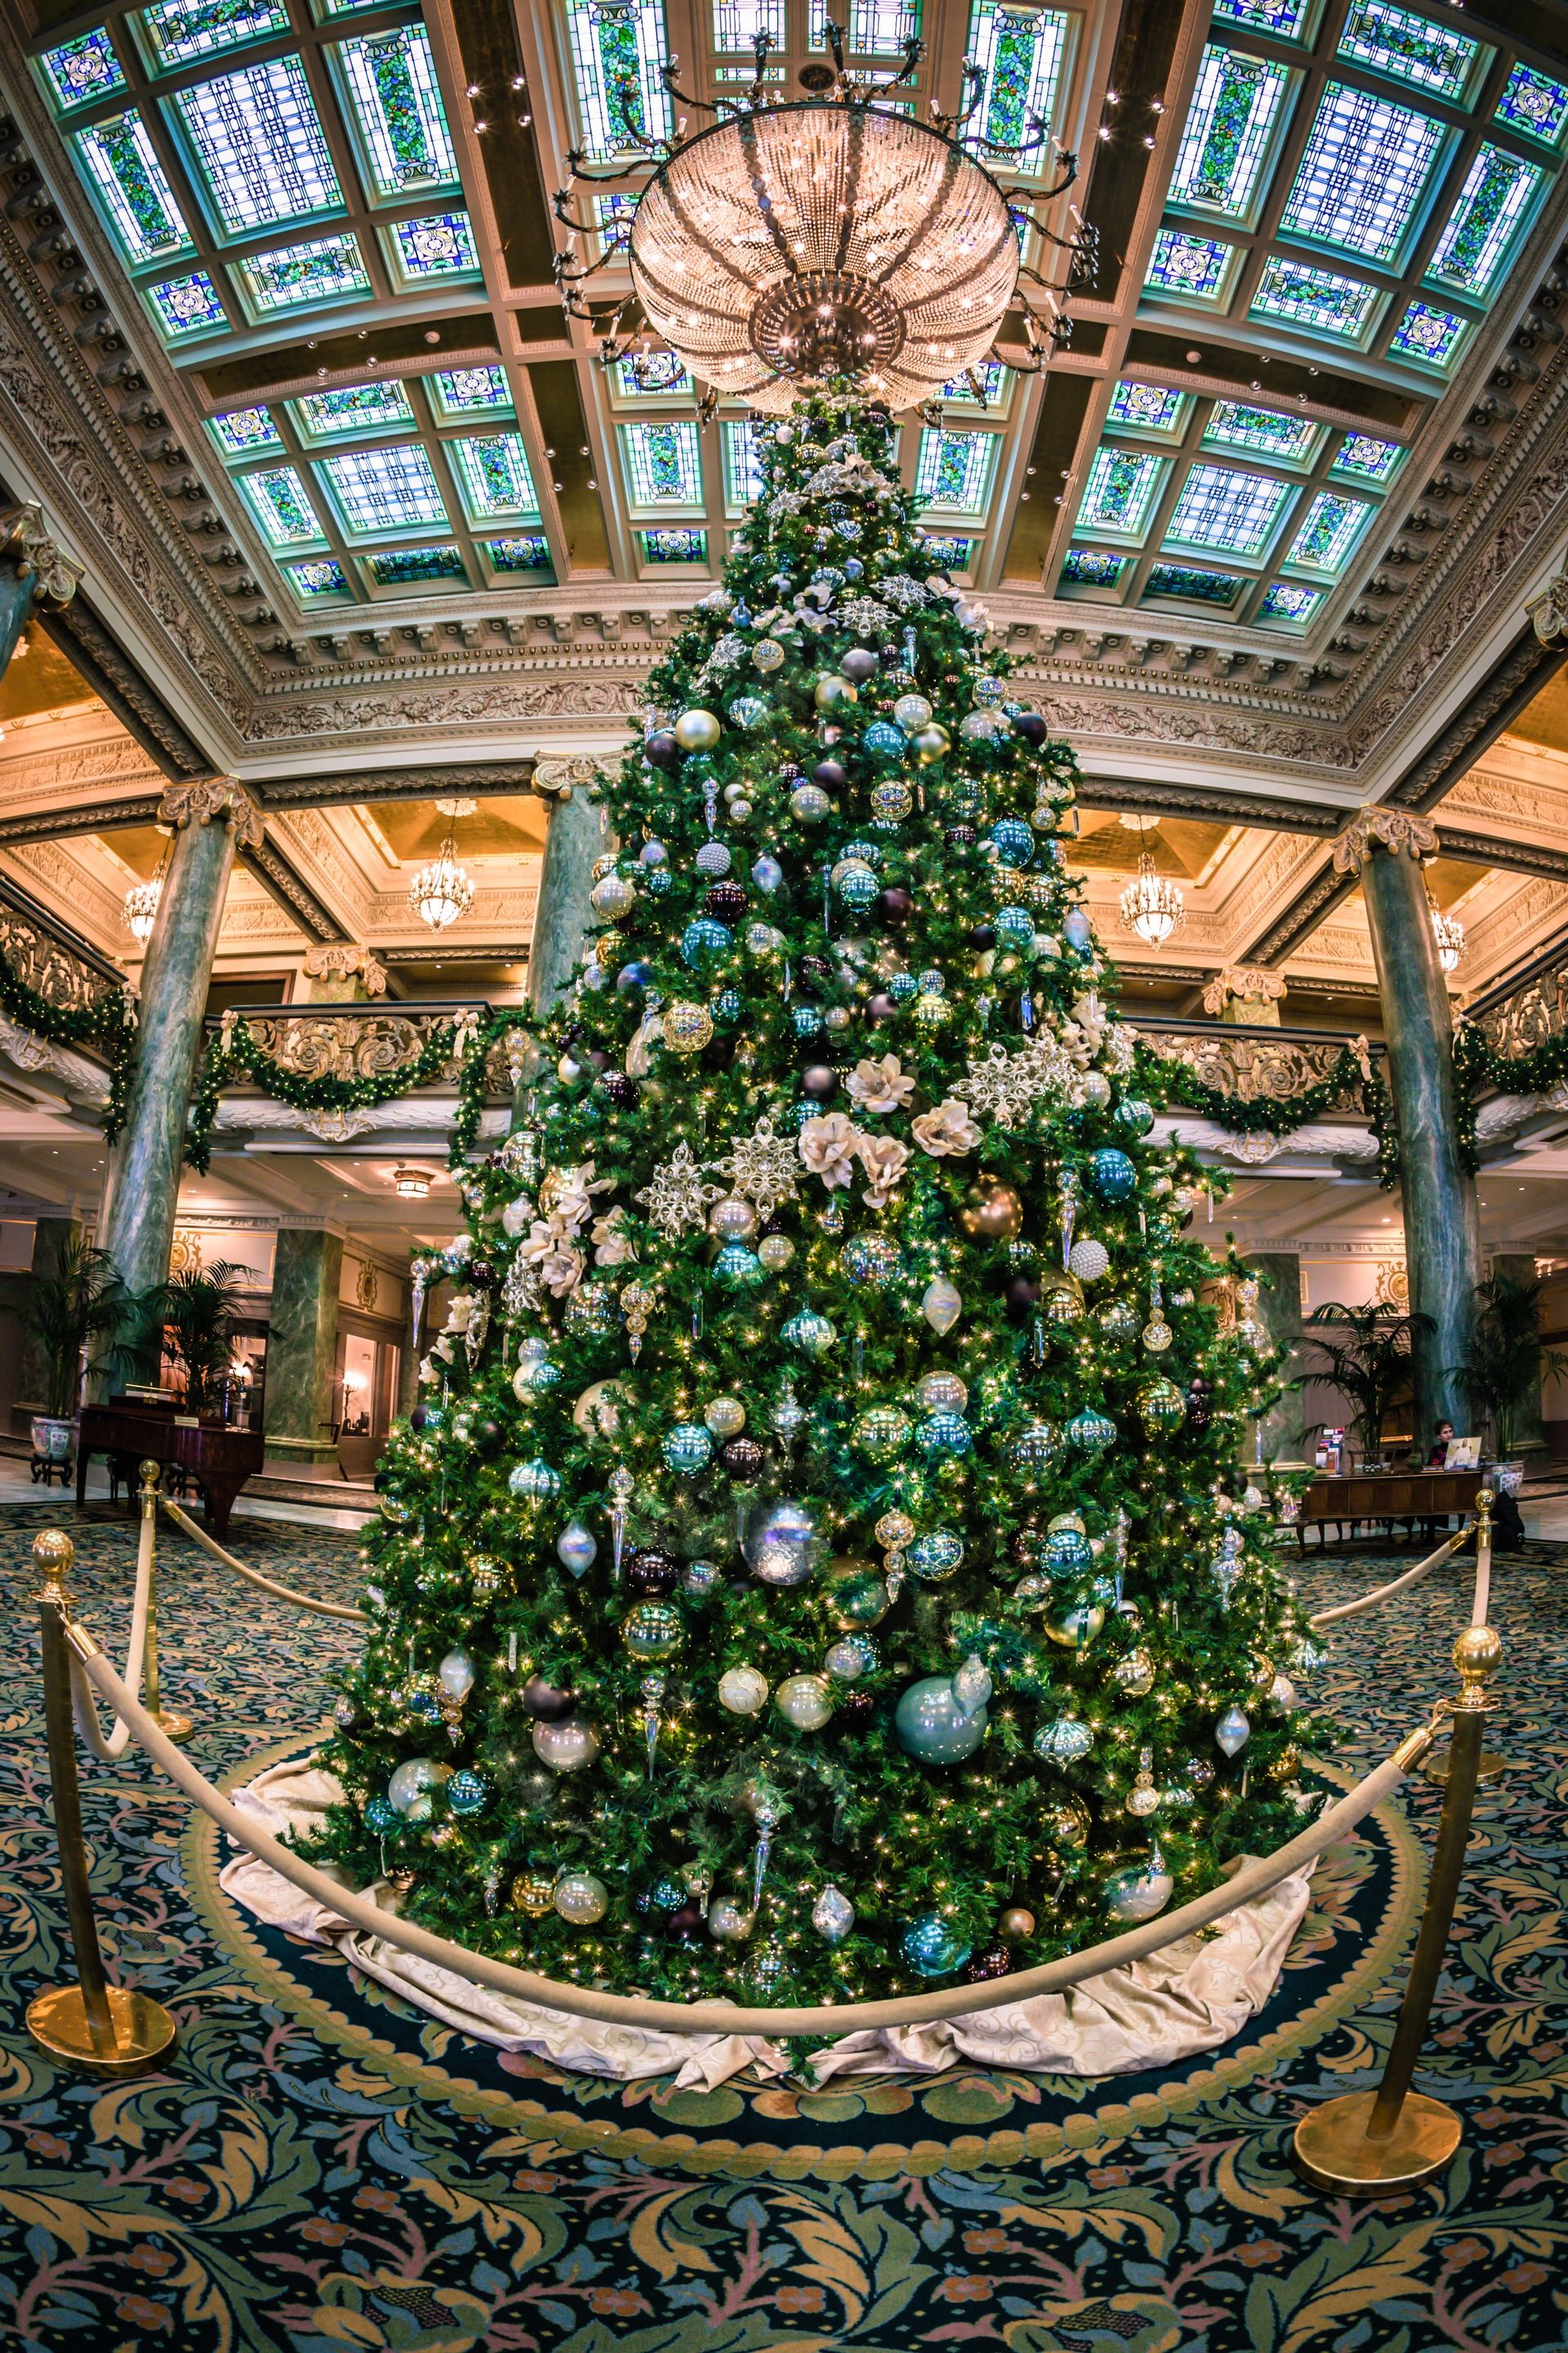 A Christmas tree stands in the lobby of the Joseph Smith Memorial Building.